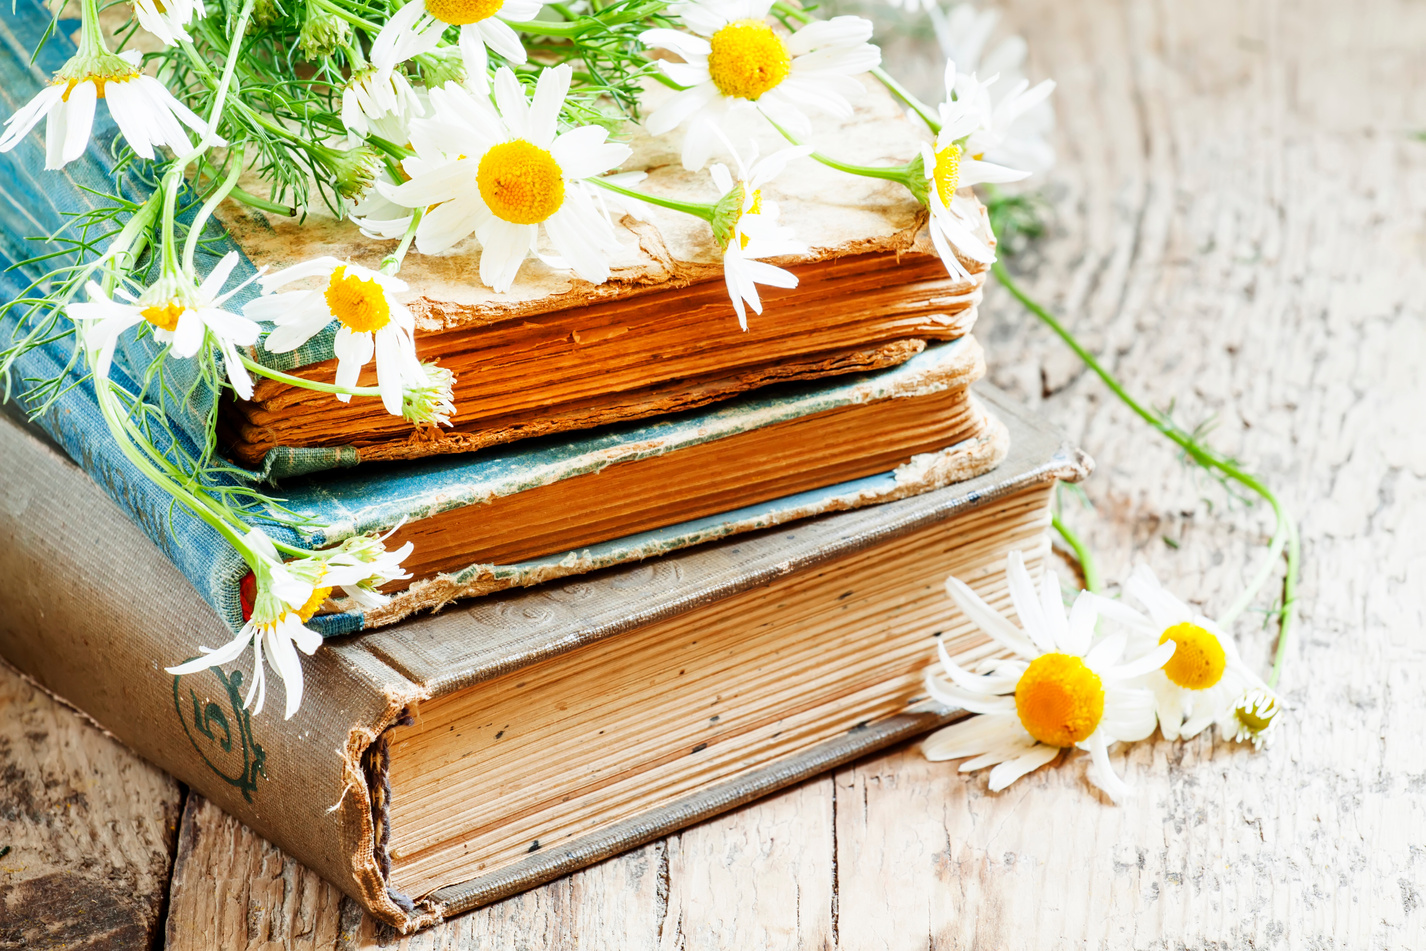 Old books, bouquet of field daisies